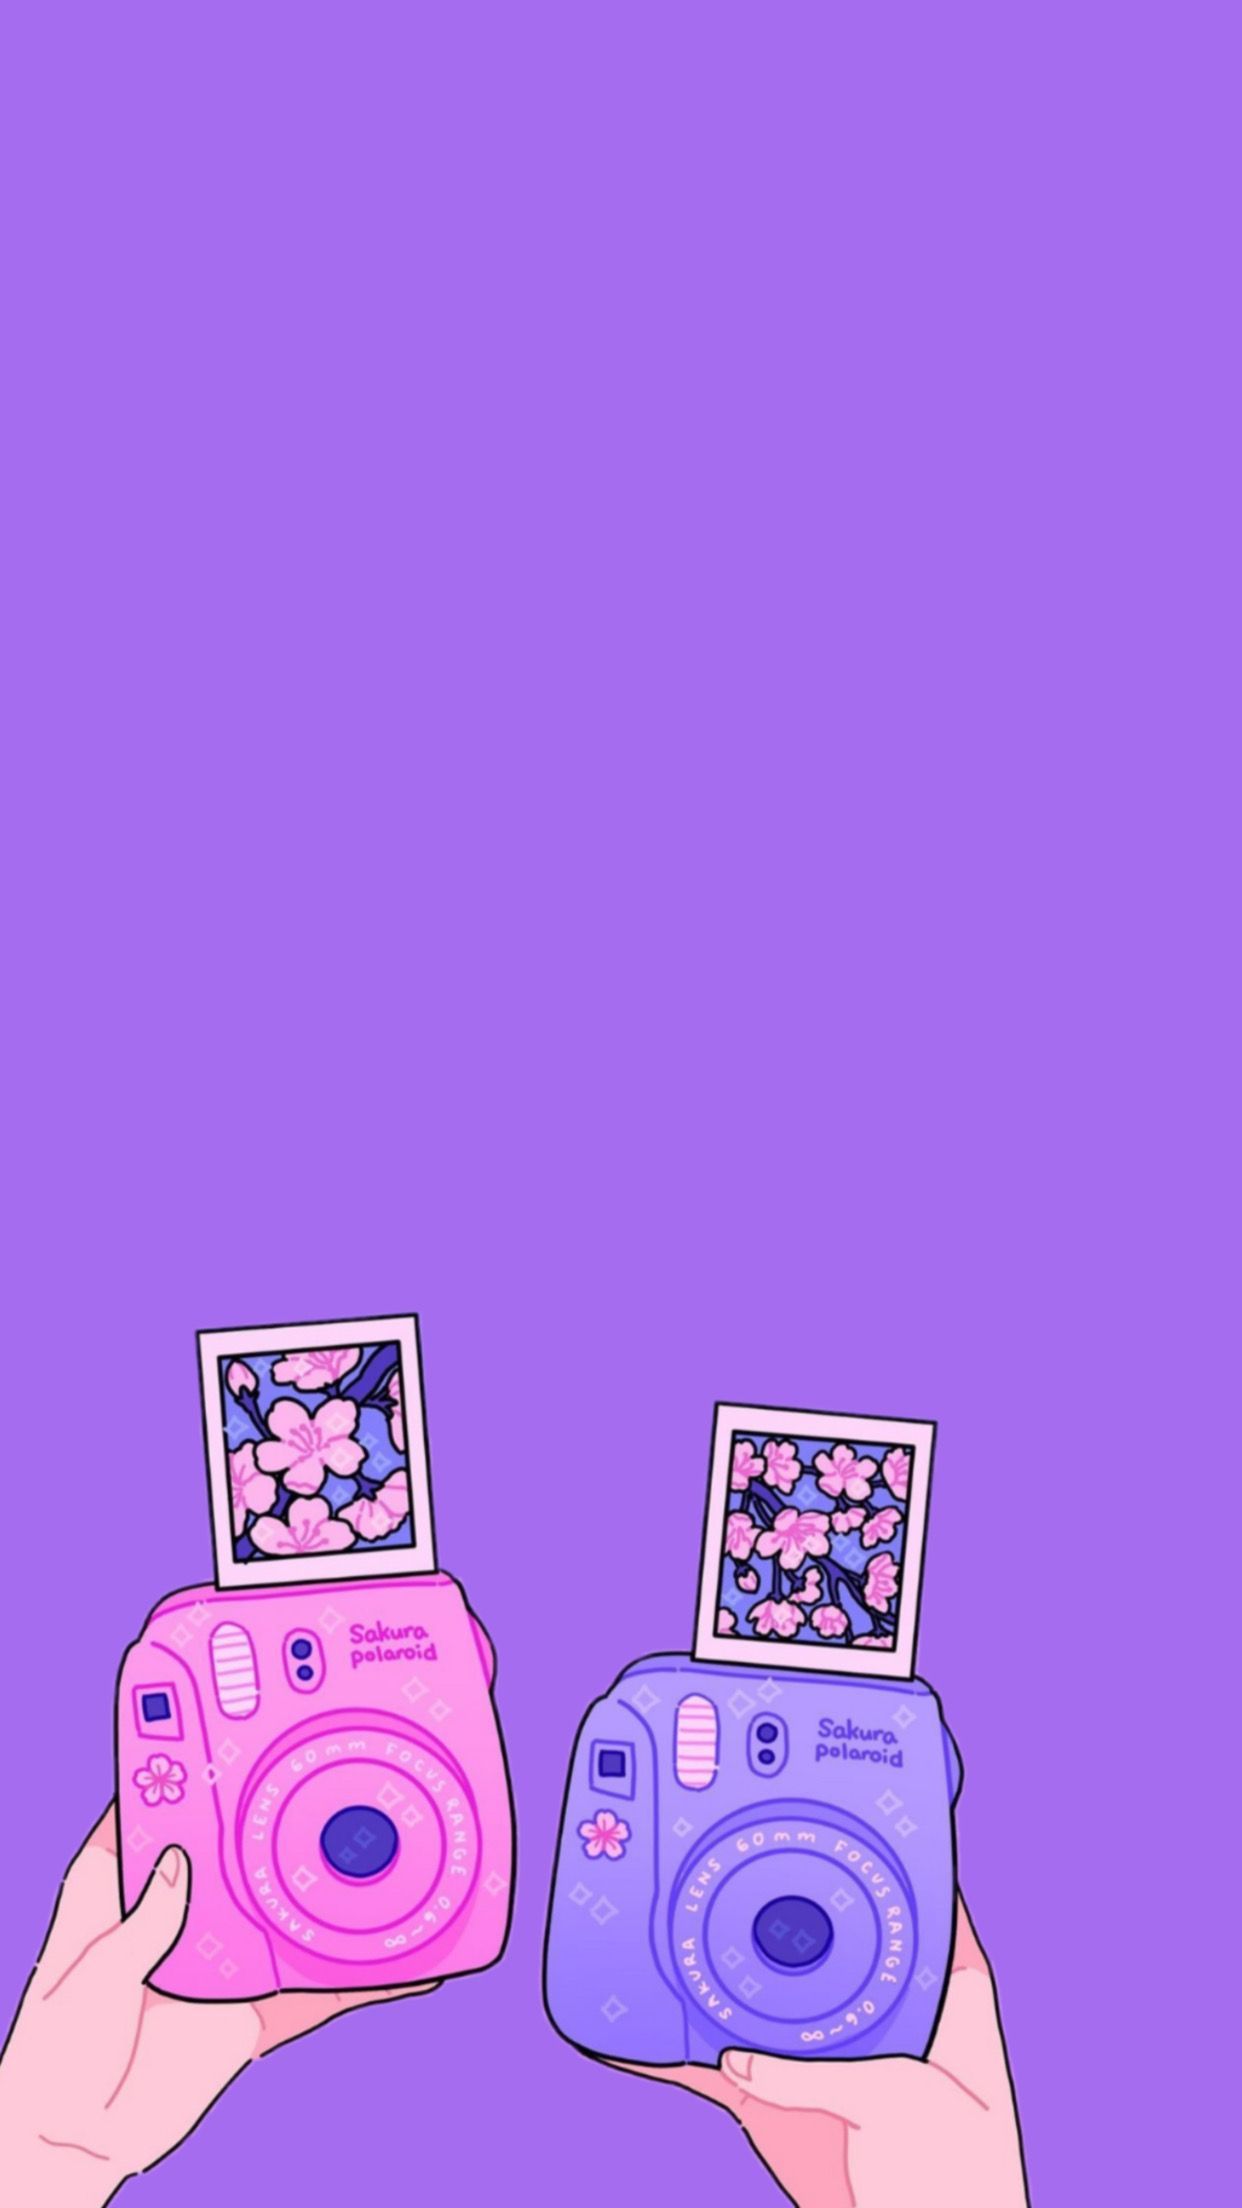 Two hands holding up a purple camera and pink one - Pretty, cute